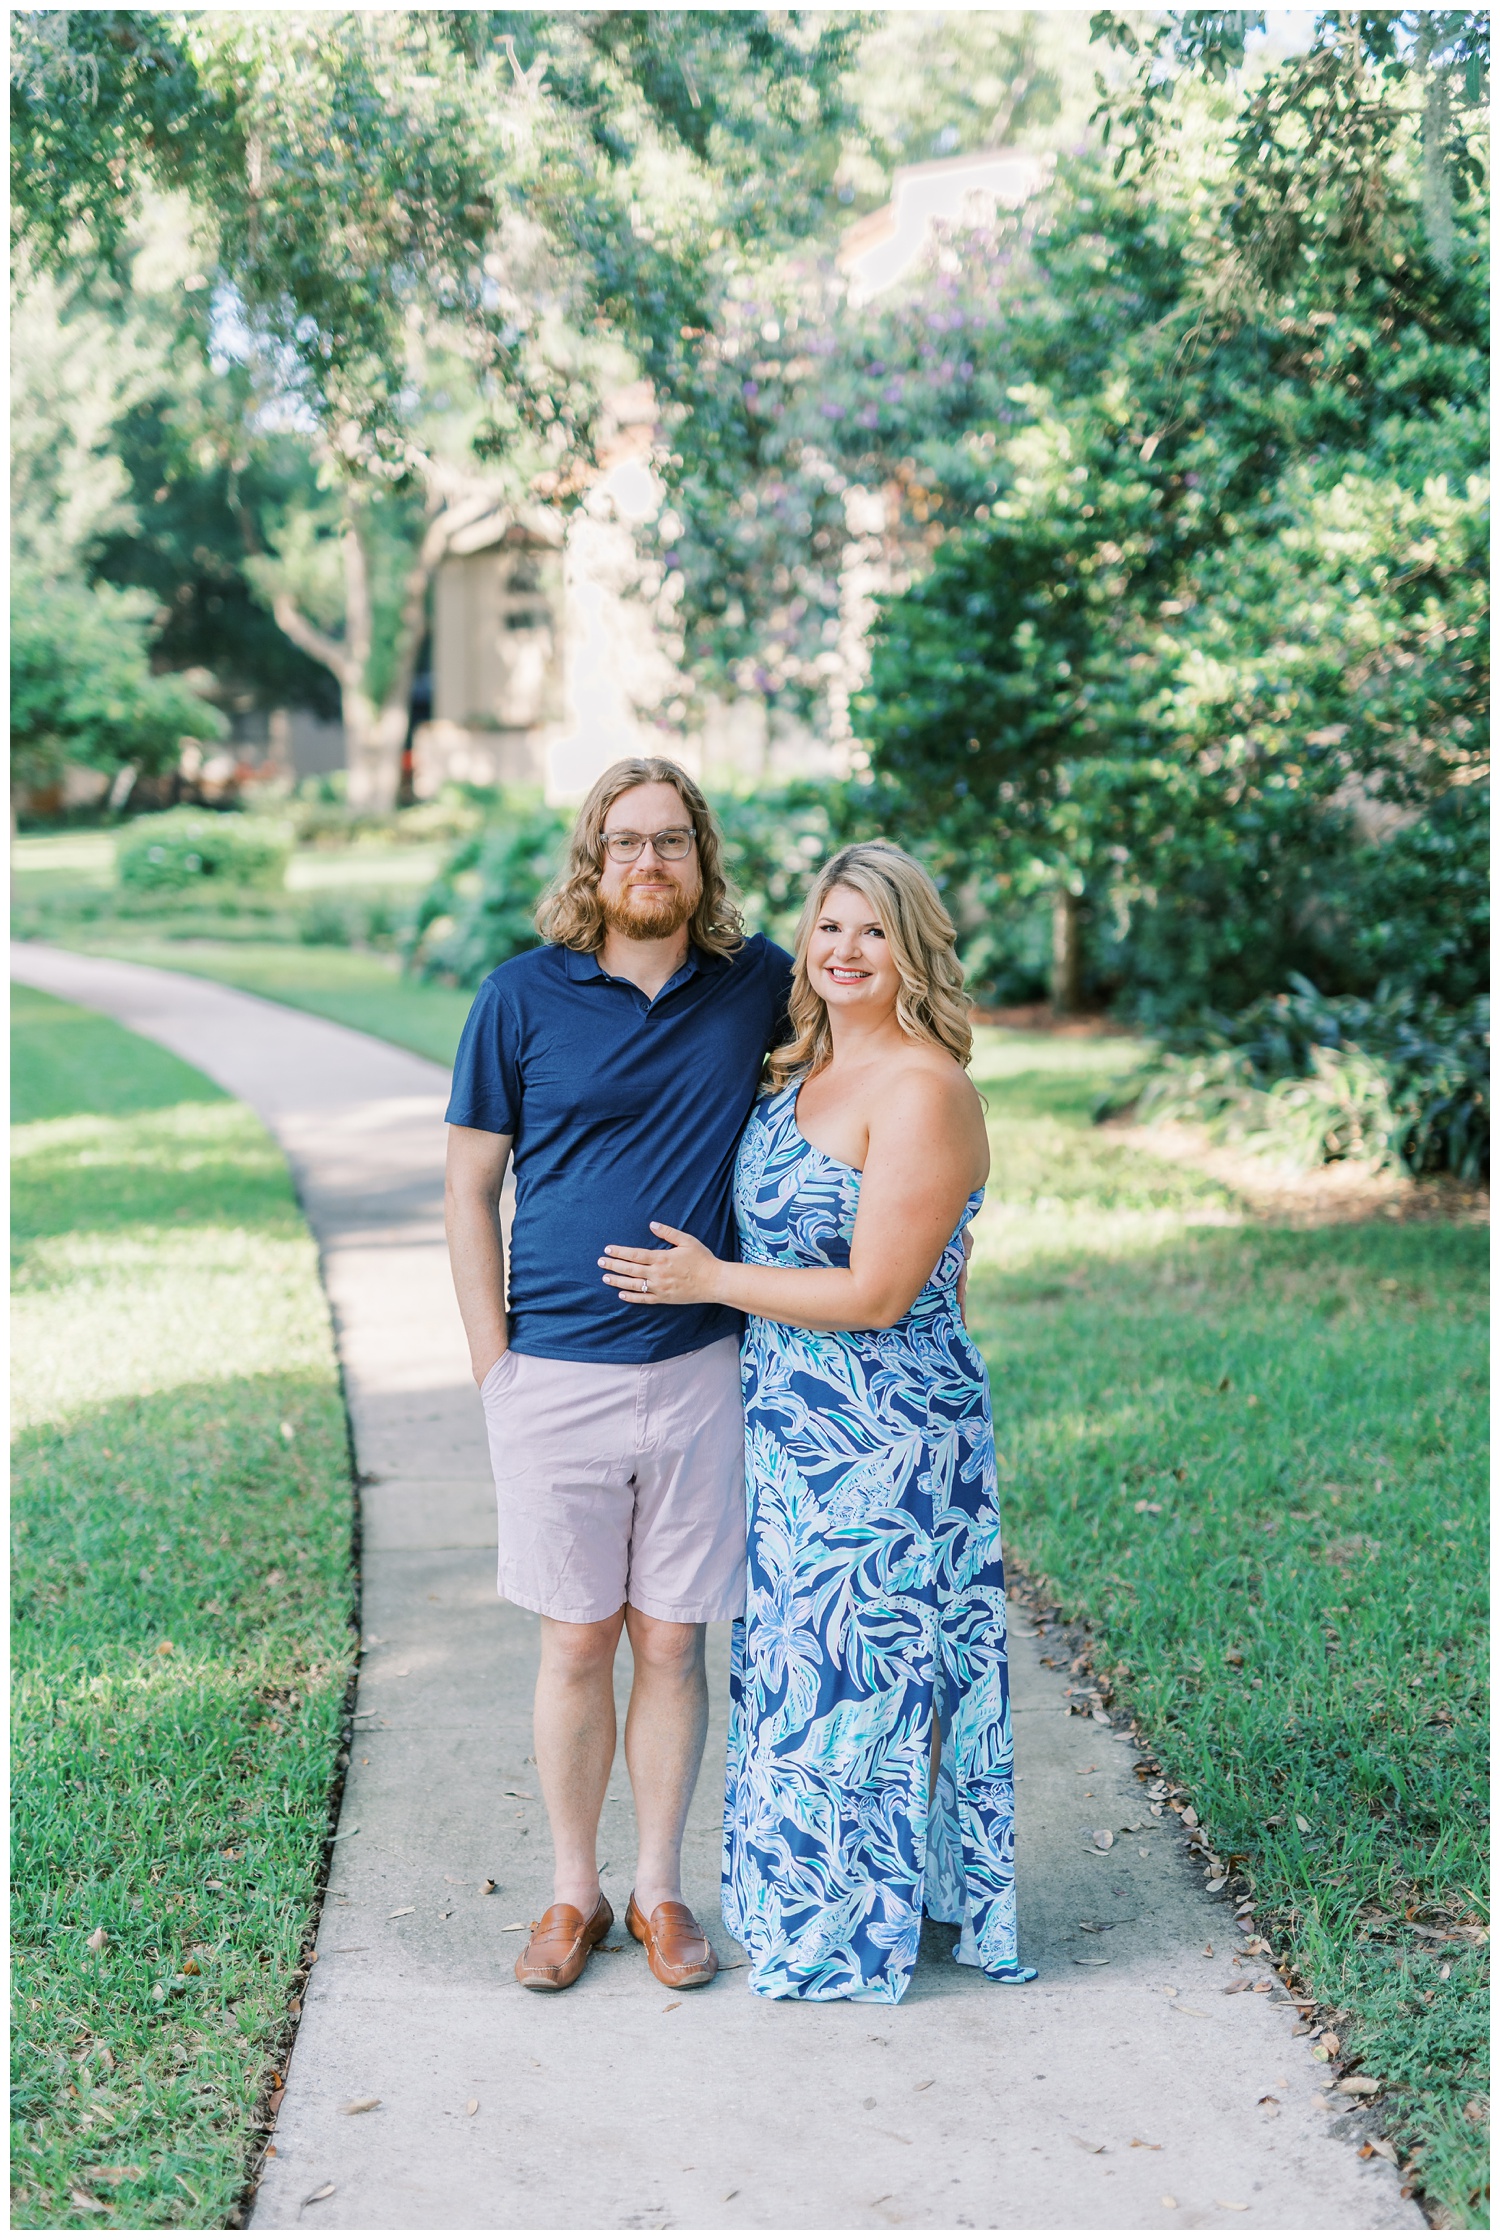 Engagement session with Lilly Pulitzer dress